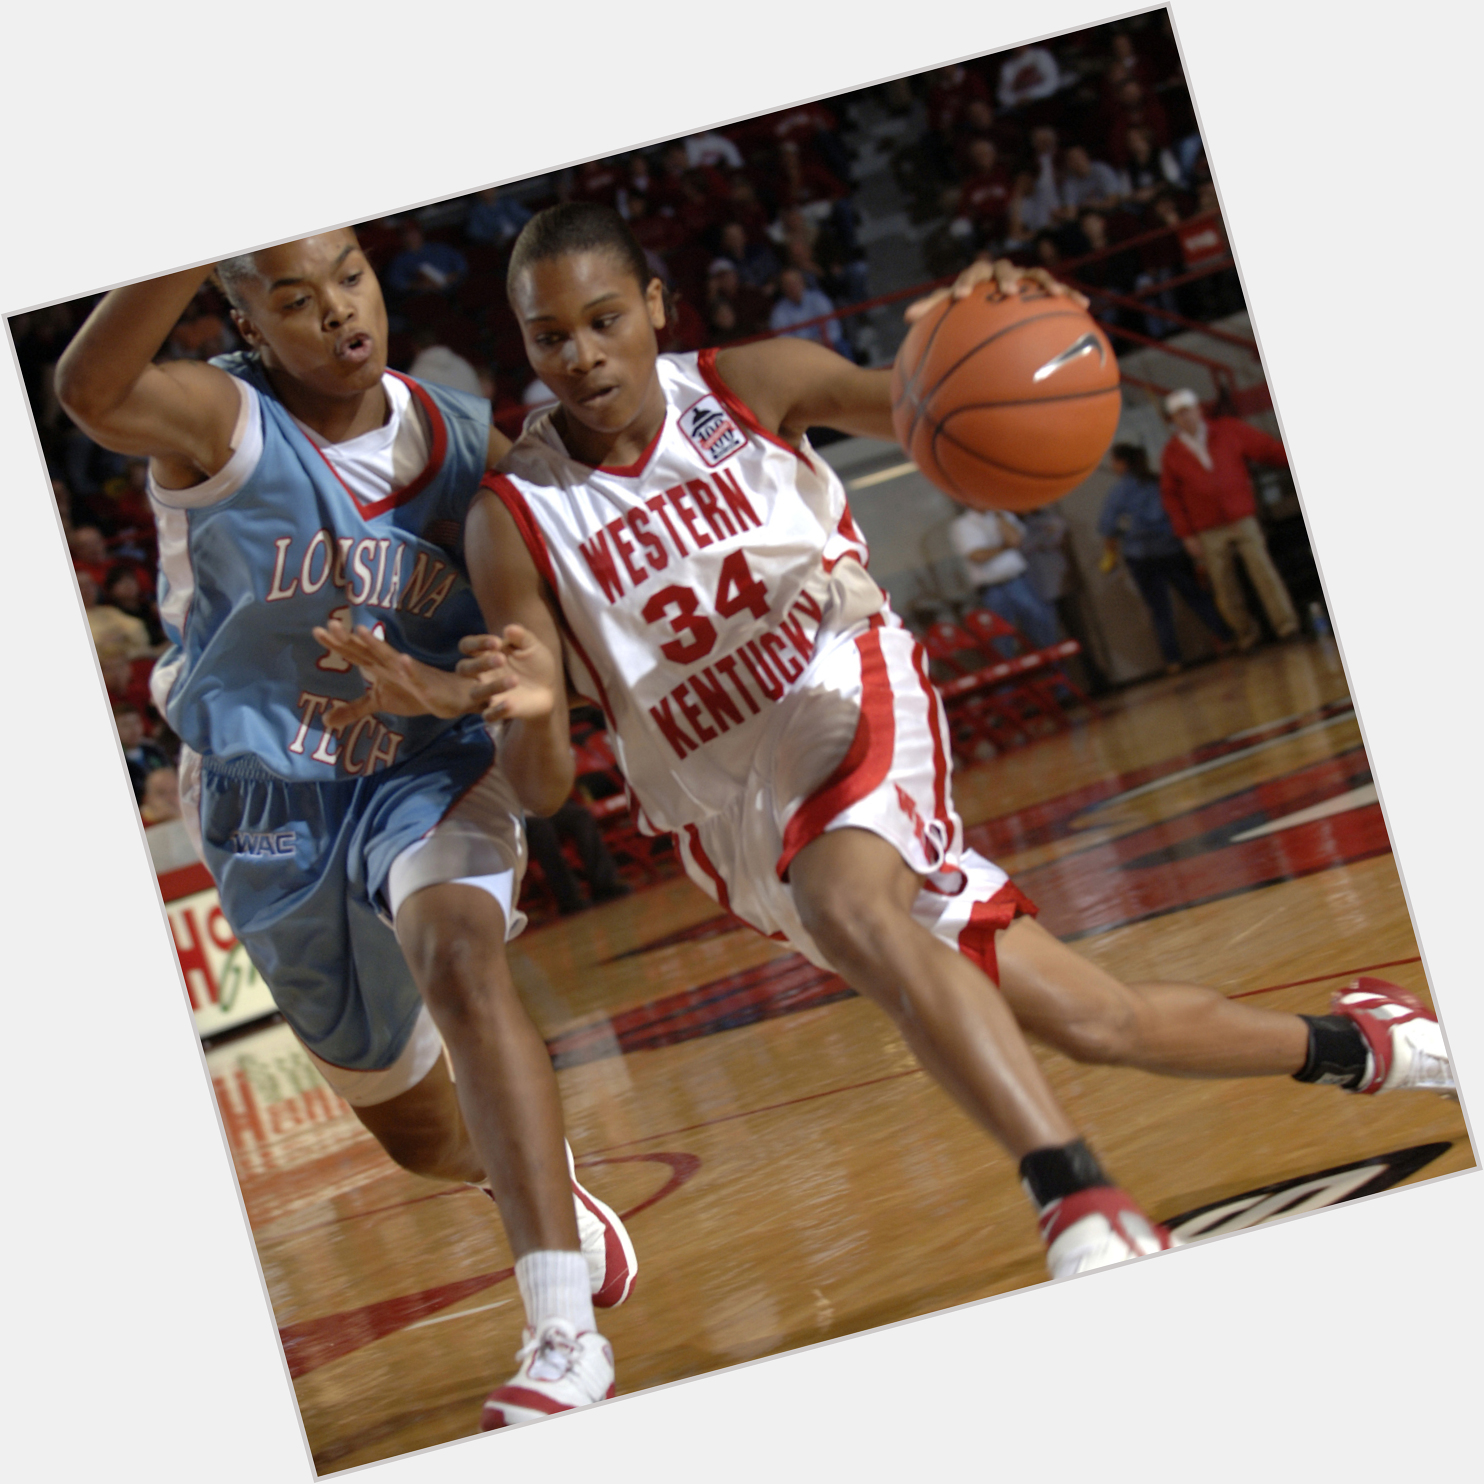 Happy birthday to current assistant coach and former Lady Topper legend, Tiffany Porter-Talbert! 